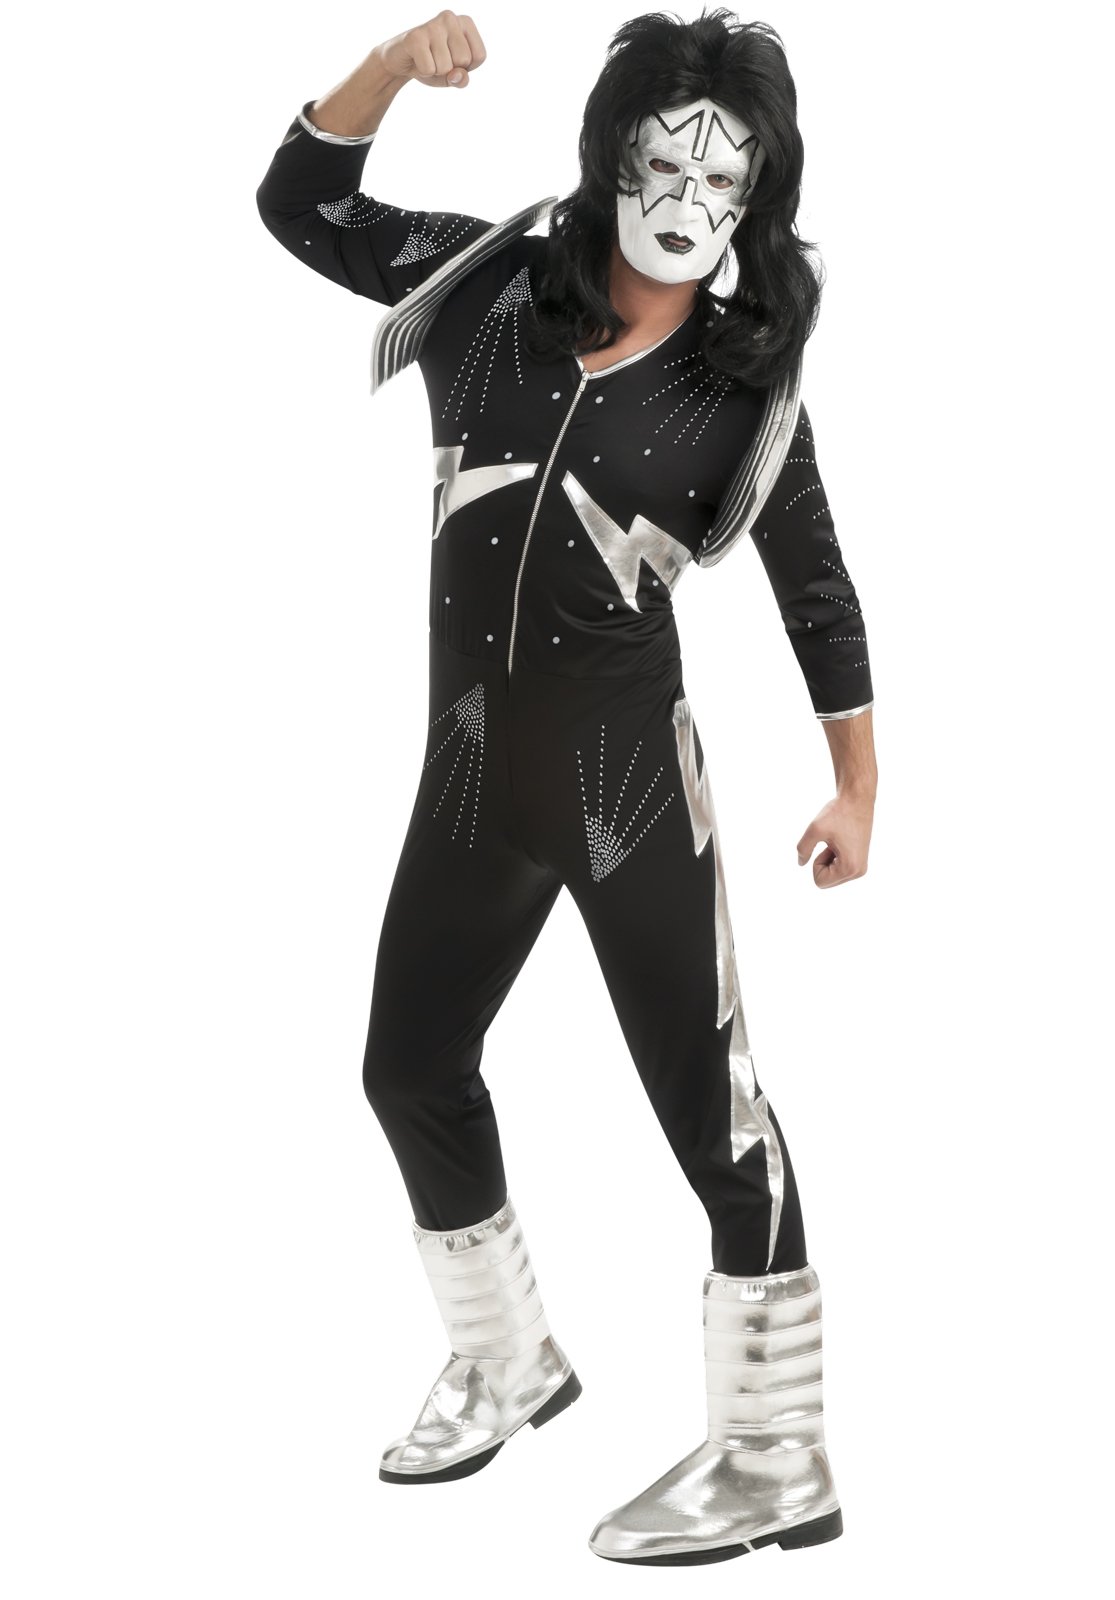 KISS Spaceman Deluxe Adult Costume